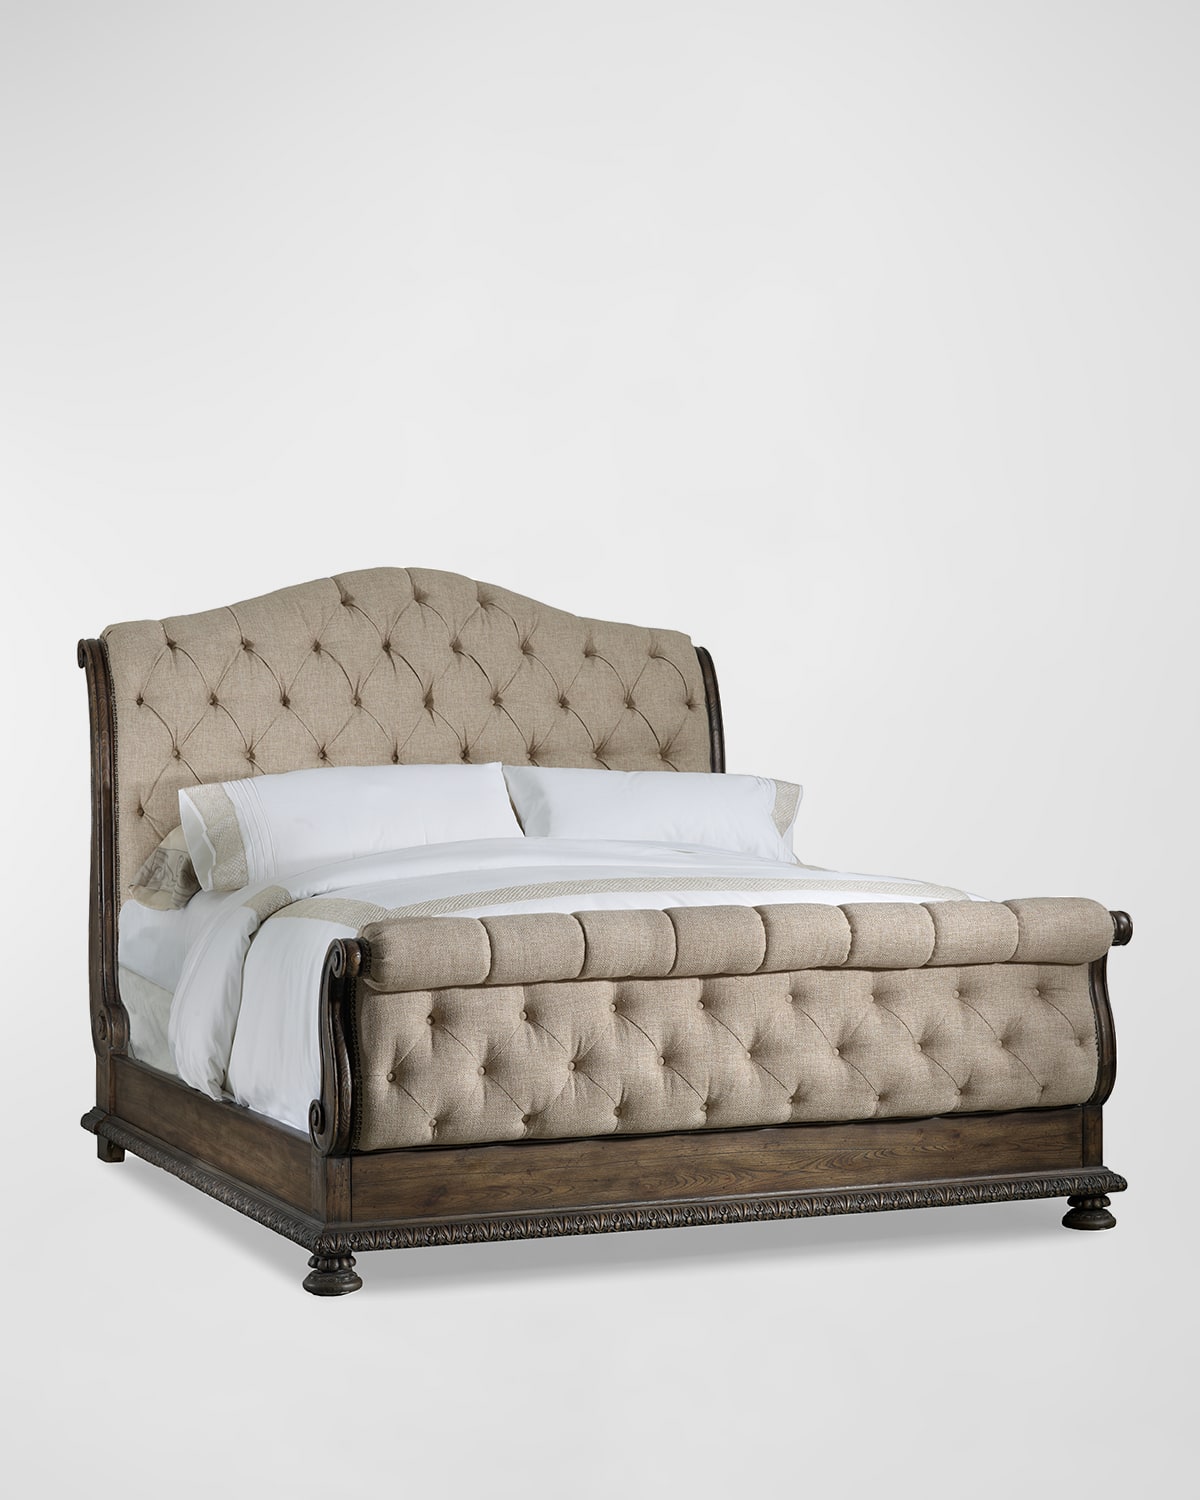 Rhapsody Tufted King Bed